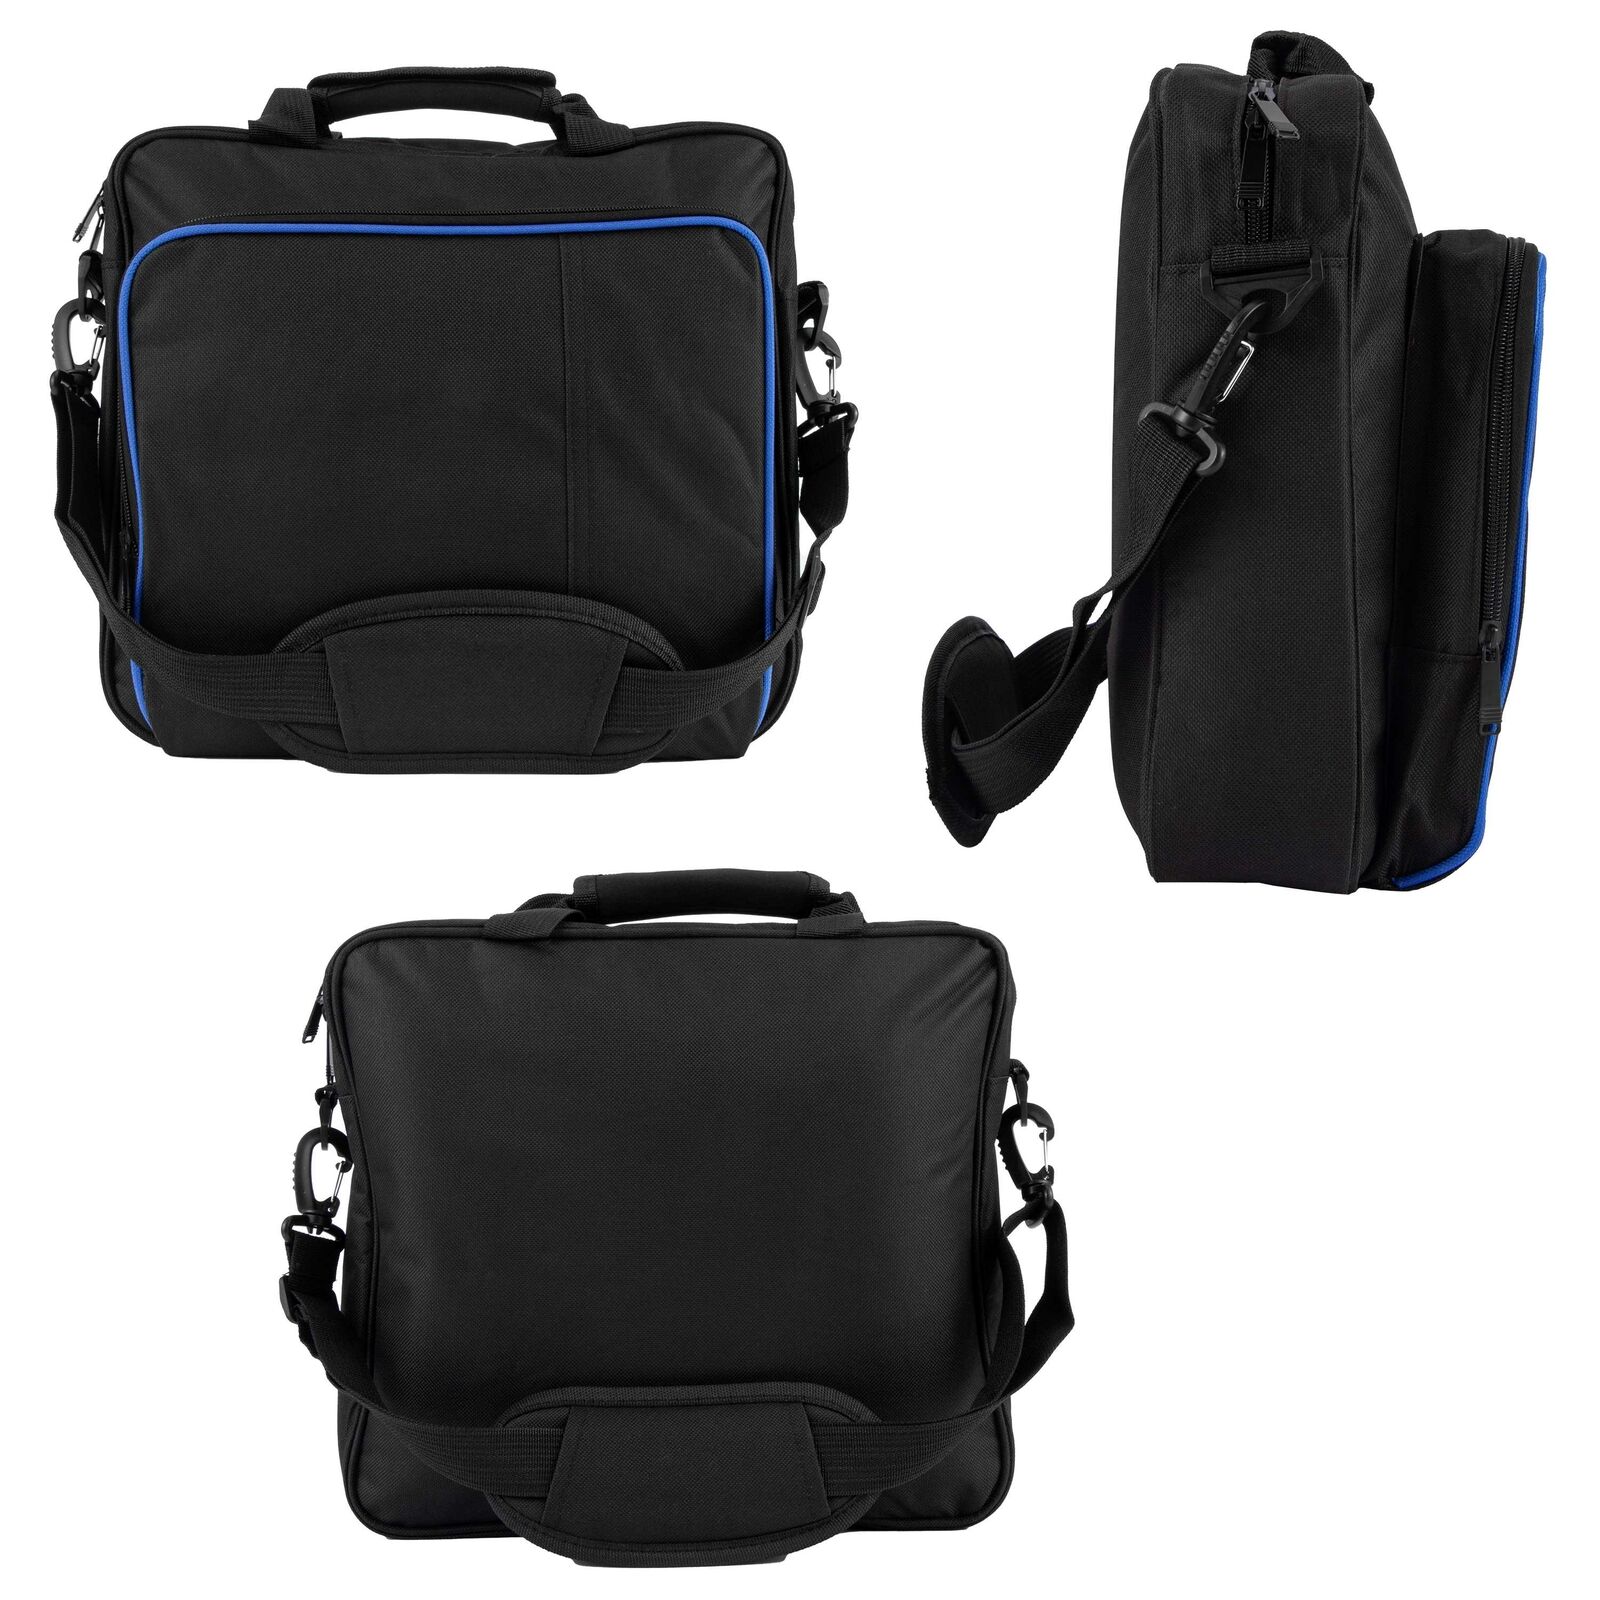 Multi-function Travel Carry Case Storage Carrying Bag For PlayStation 4 PS4